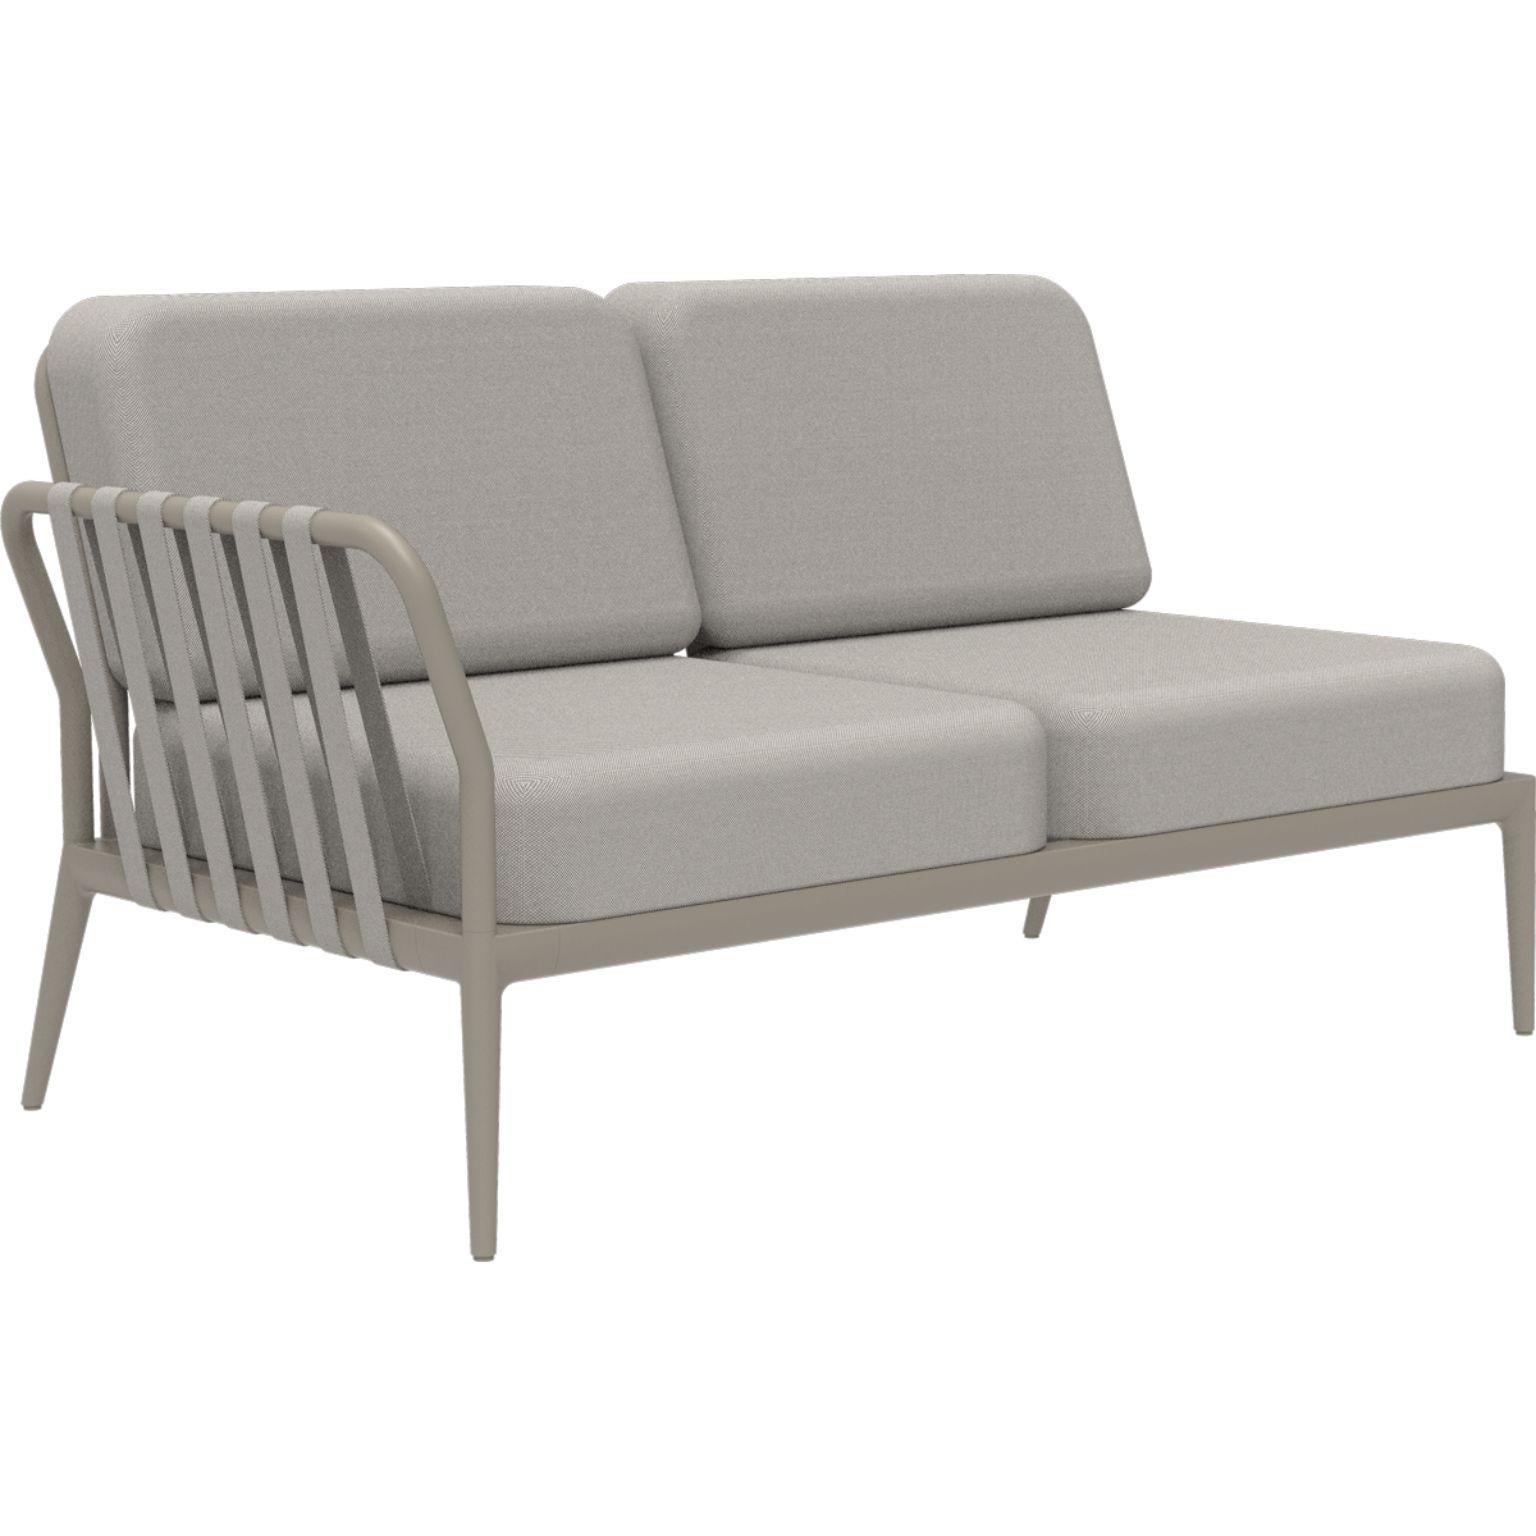 Ribbons cream double right modular sofa by MOWEE
Dimensions: D83 x W148 x H81 cm (seat height 42 cm).
Material: Aluminium and upholstery.
Weight: 29 kg
Also available in different colors and finishes.

An unmistakable collection for its beauty